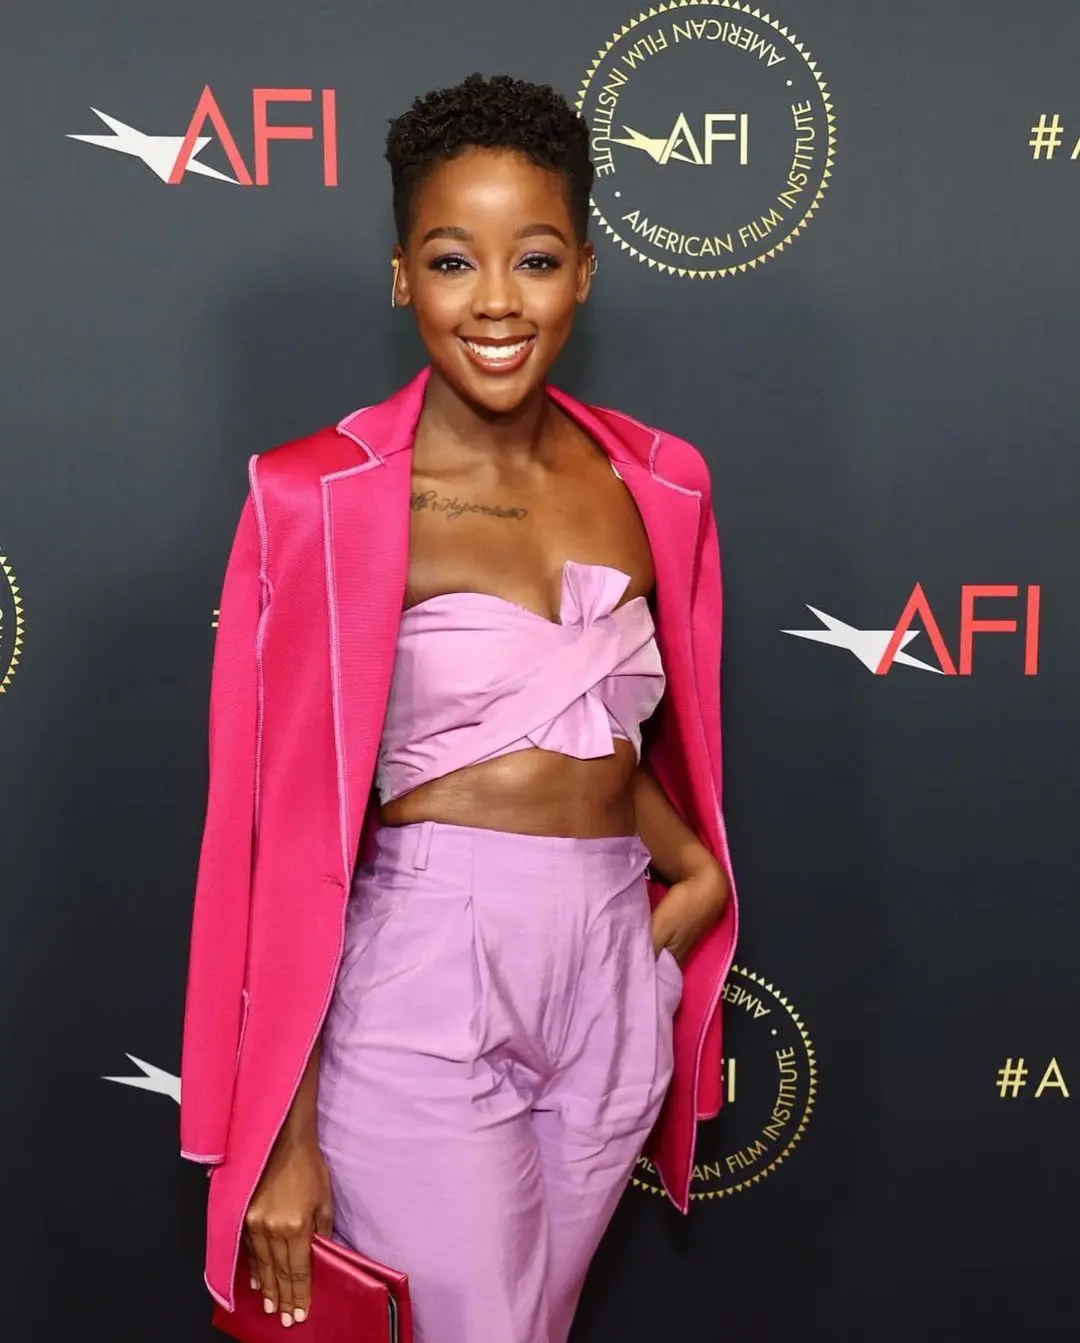 Actress Thuso Mbedu bags recognition from the American Film Institute